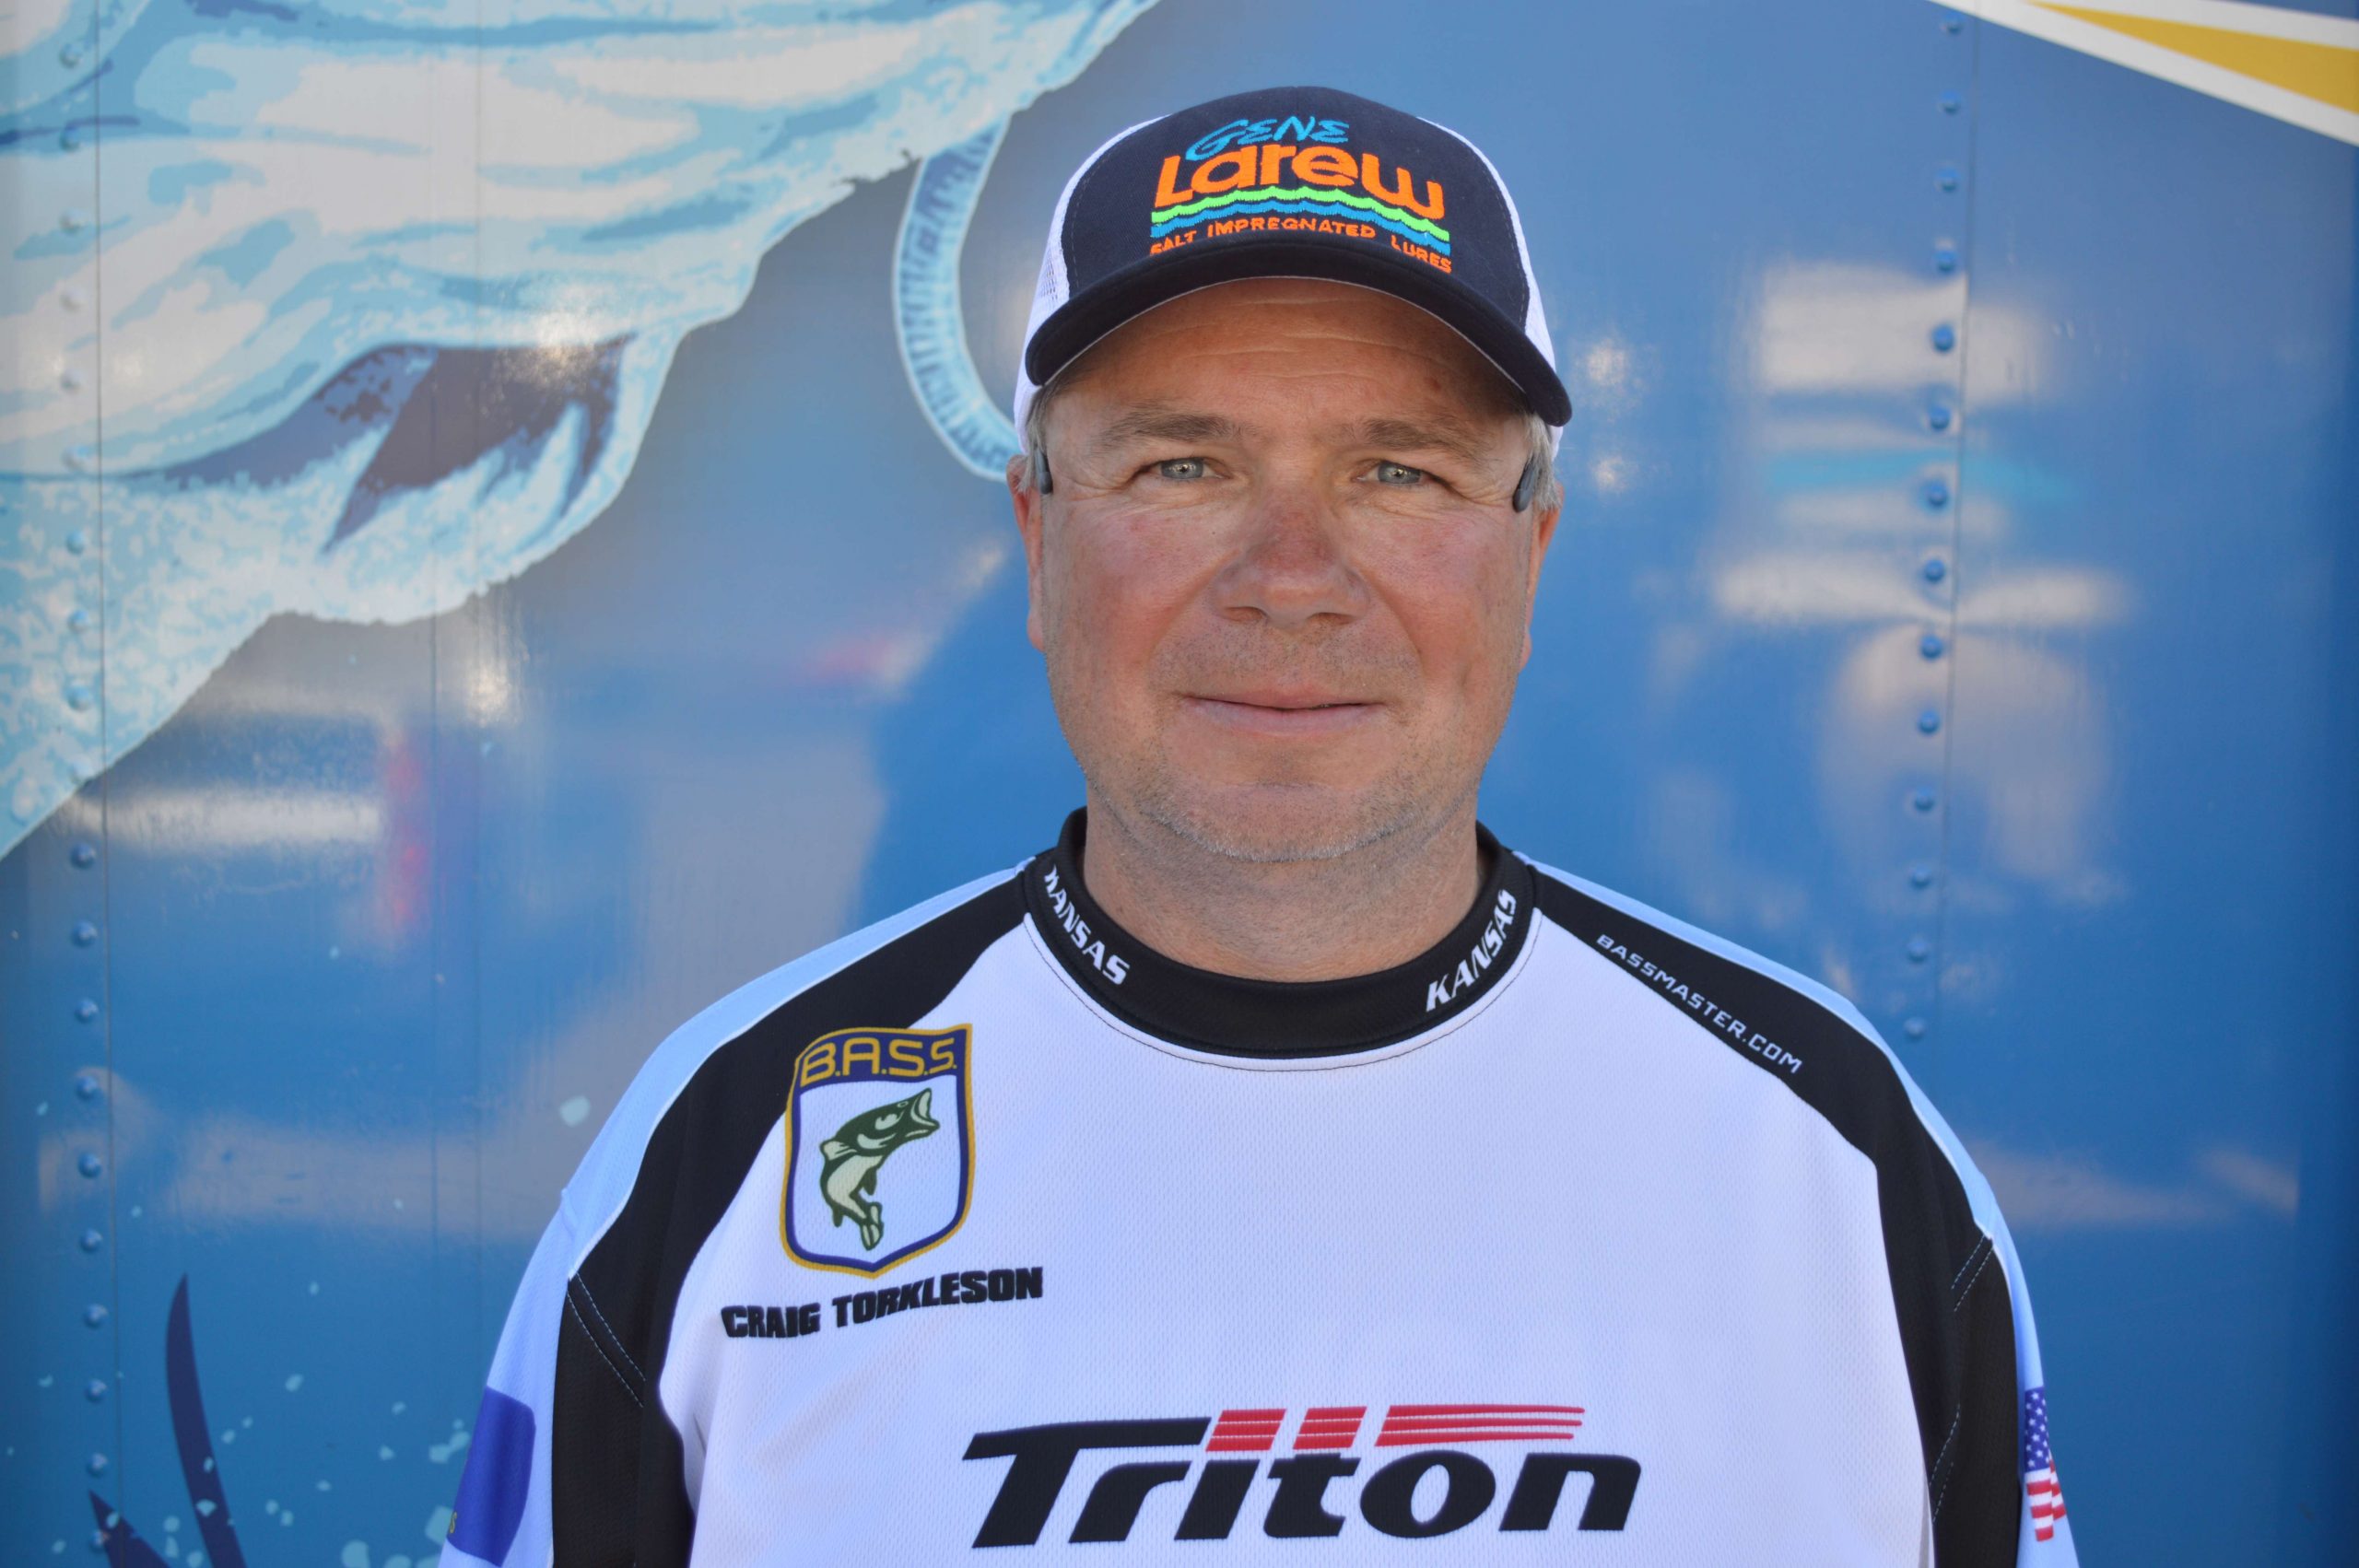 <h4>
Craig Torkelson</h4>
Kansas Boater<br>
B.A.S.S. Nation Club: Last Cast Bassmasters<BR>
Occupation:  Sales manager<BR>
Hobbies: Hunting, Chasing kids, Youth School and Church Volunteer <BR>
Sponsors: Nitro, Mercury, Bass Pro Shops, Pelican, Power-Pole, Gene Larew

 
